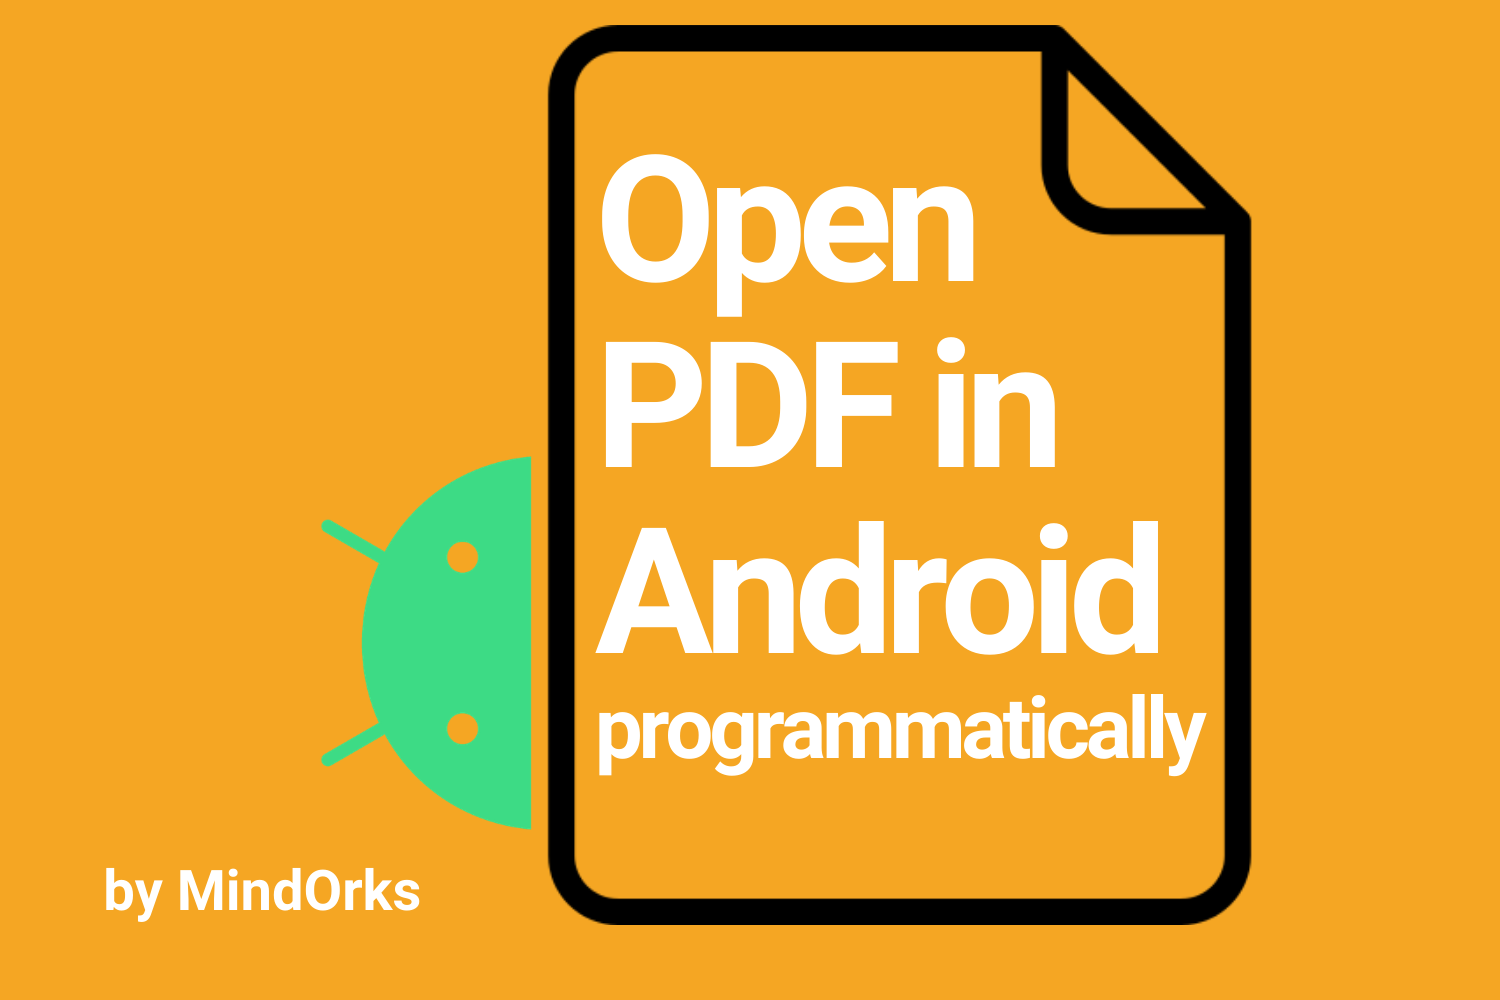 How to open a PDF file in Android programmatically?